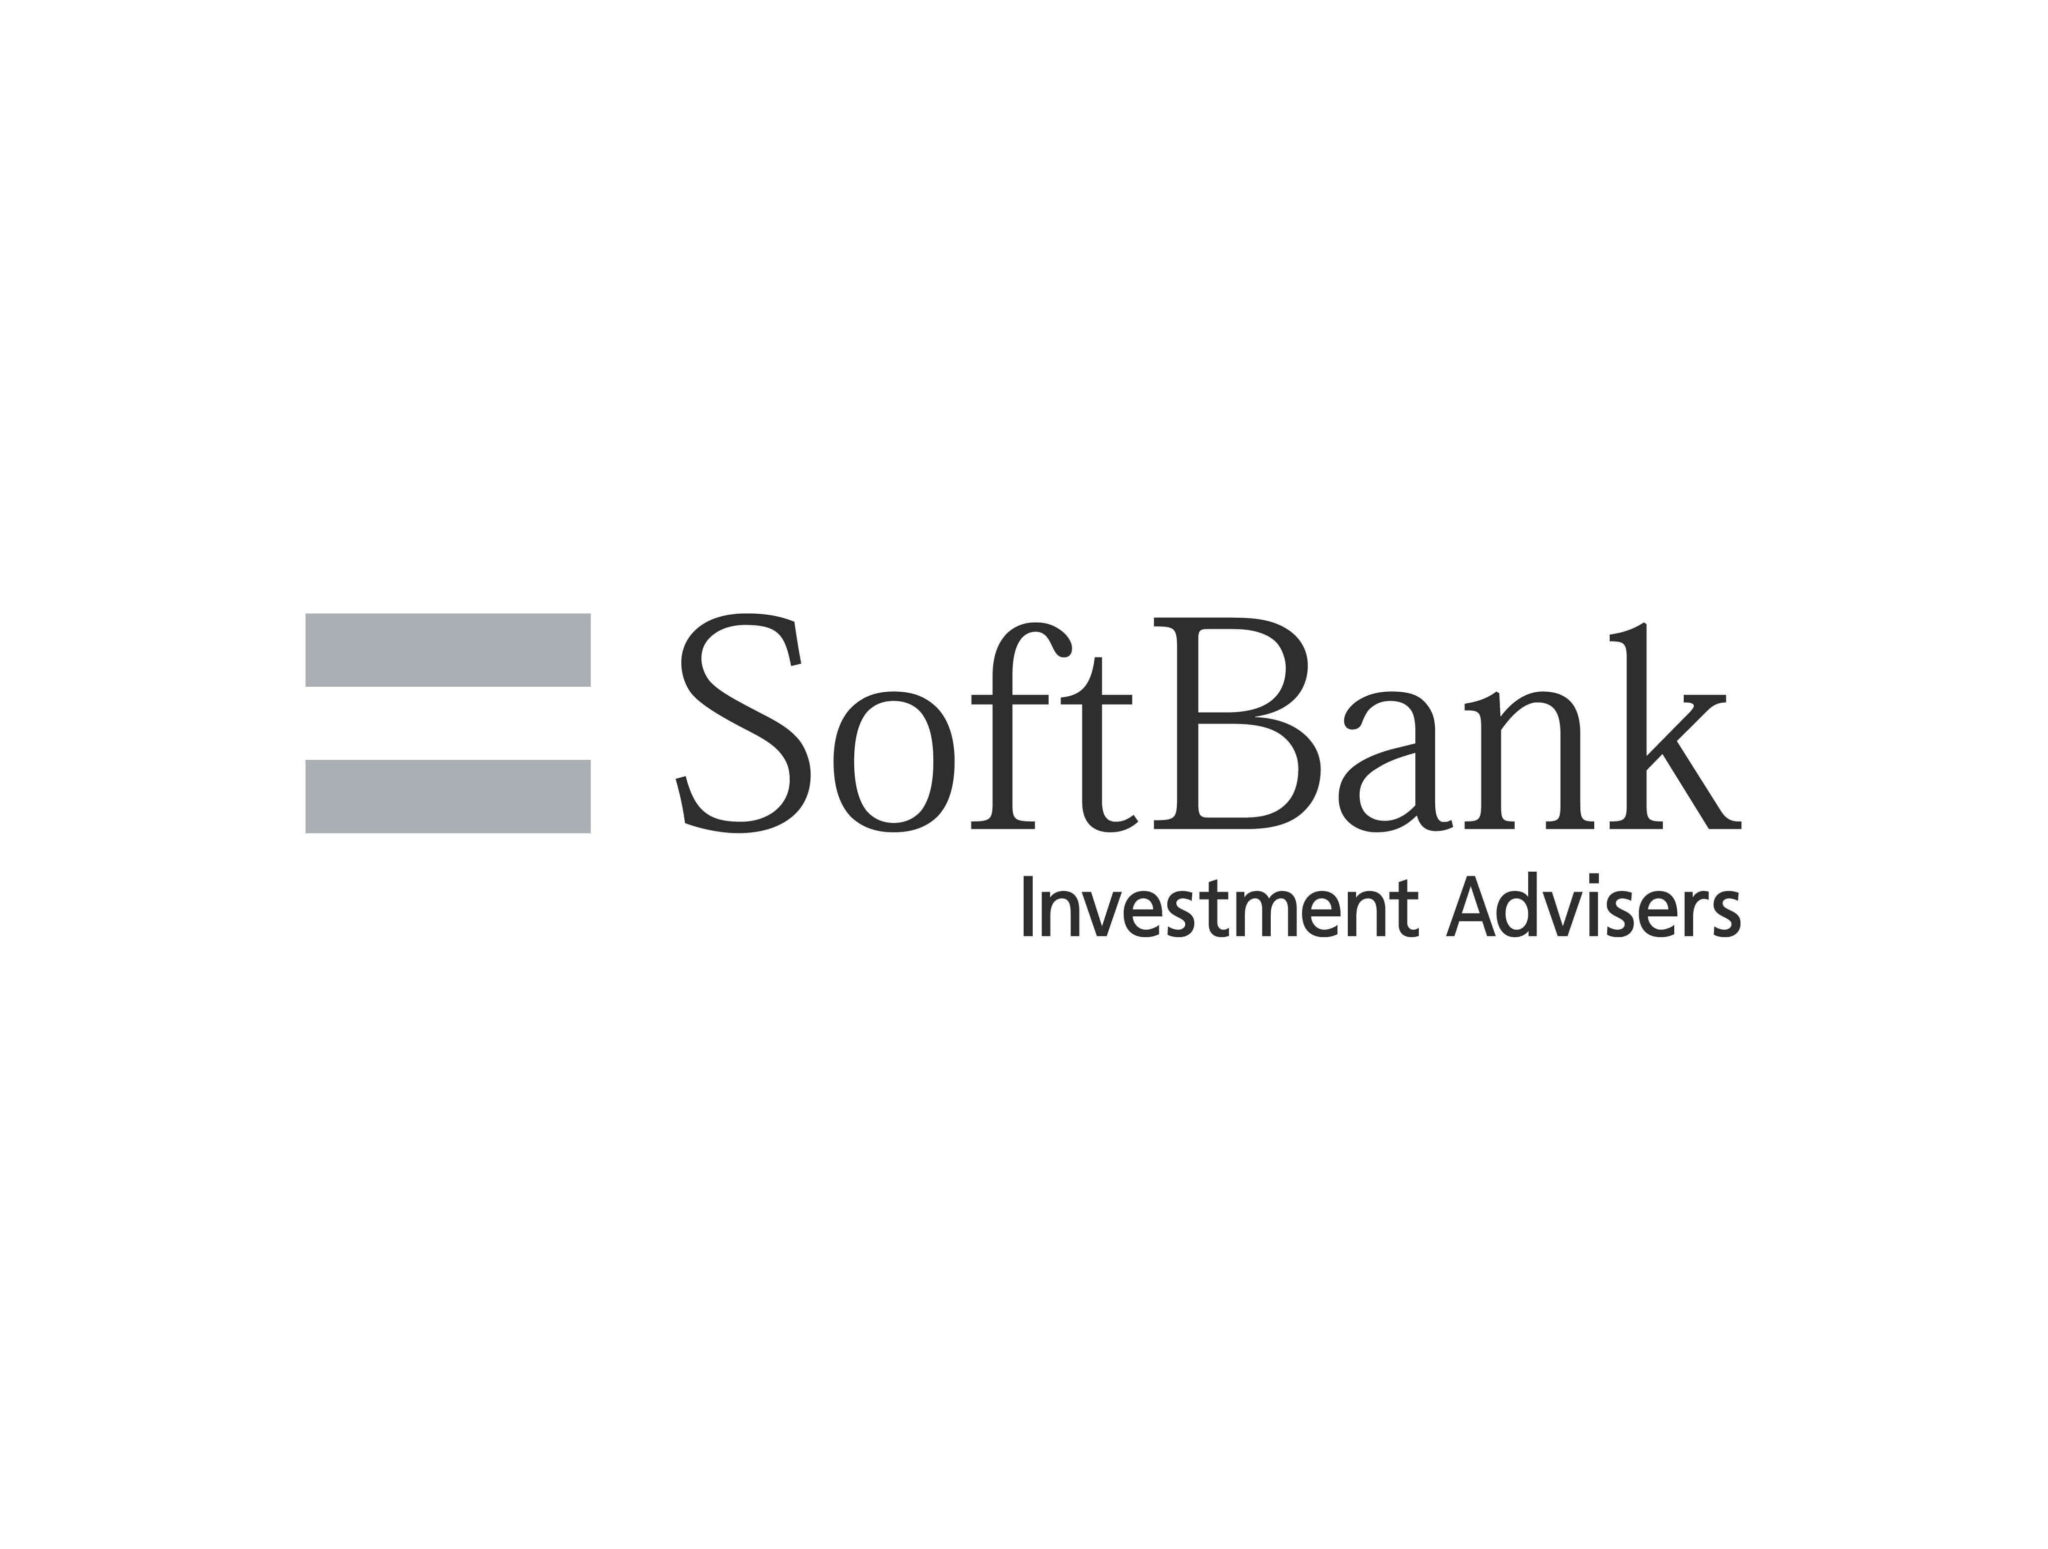 This is the SoftBank logo